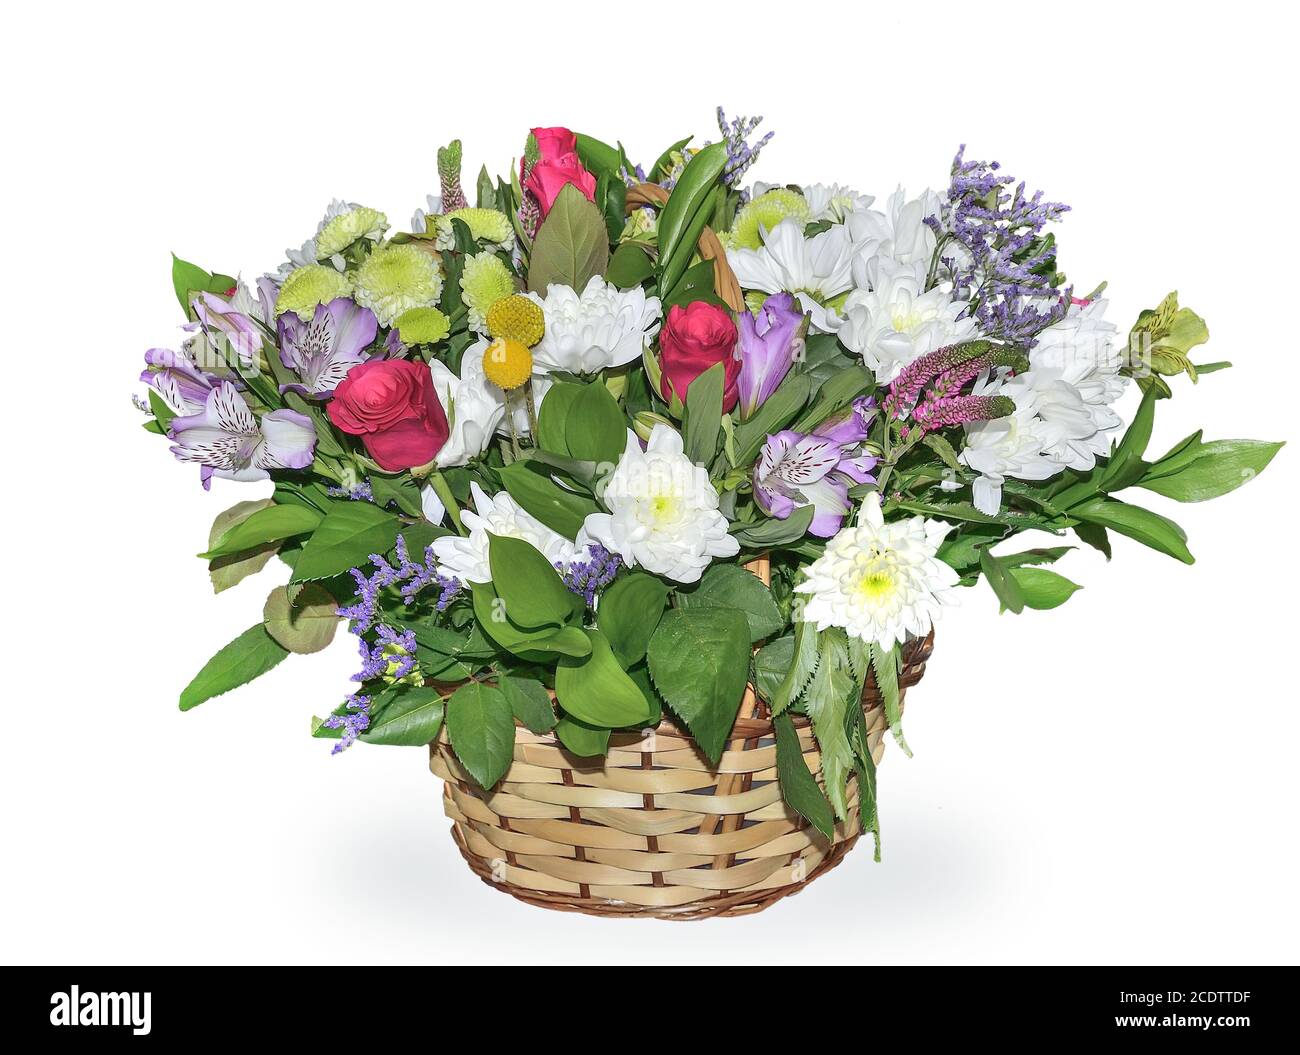 Festive bouquet of flowers in wicker basket isolated on white background Stock Photo